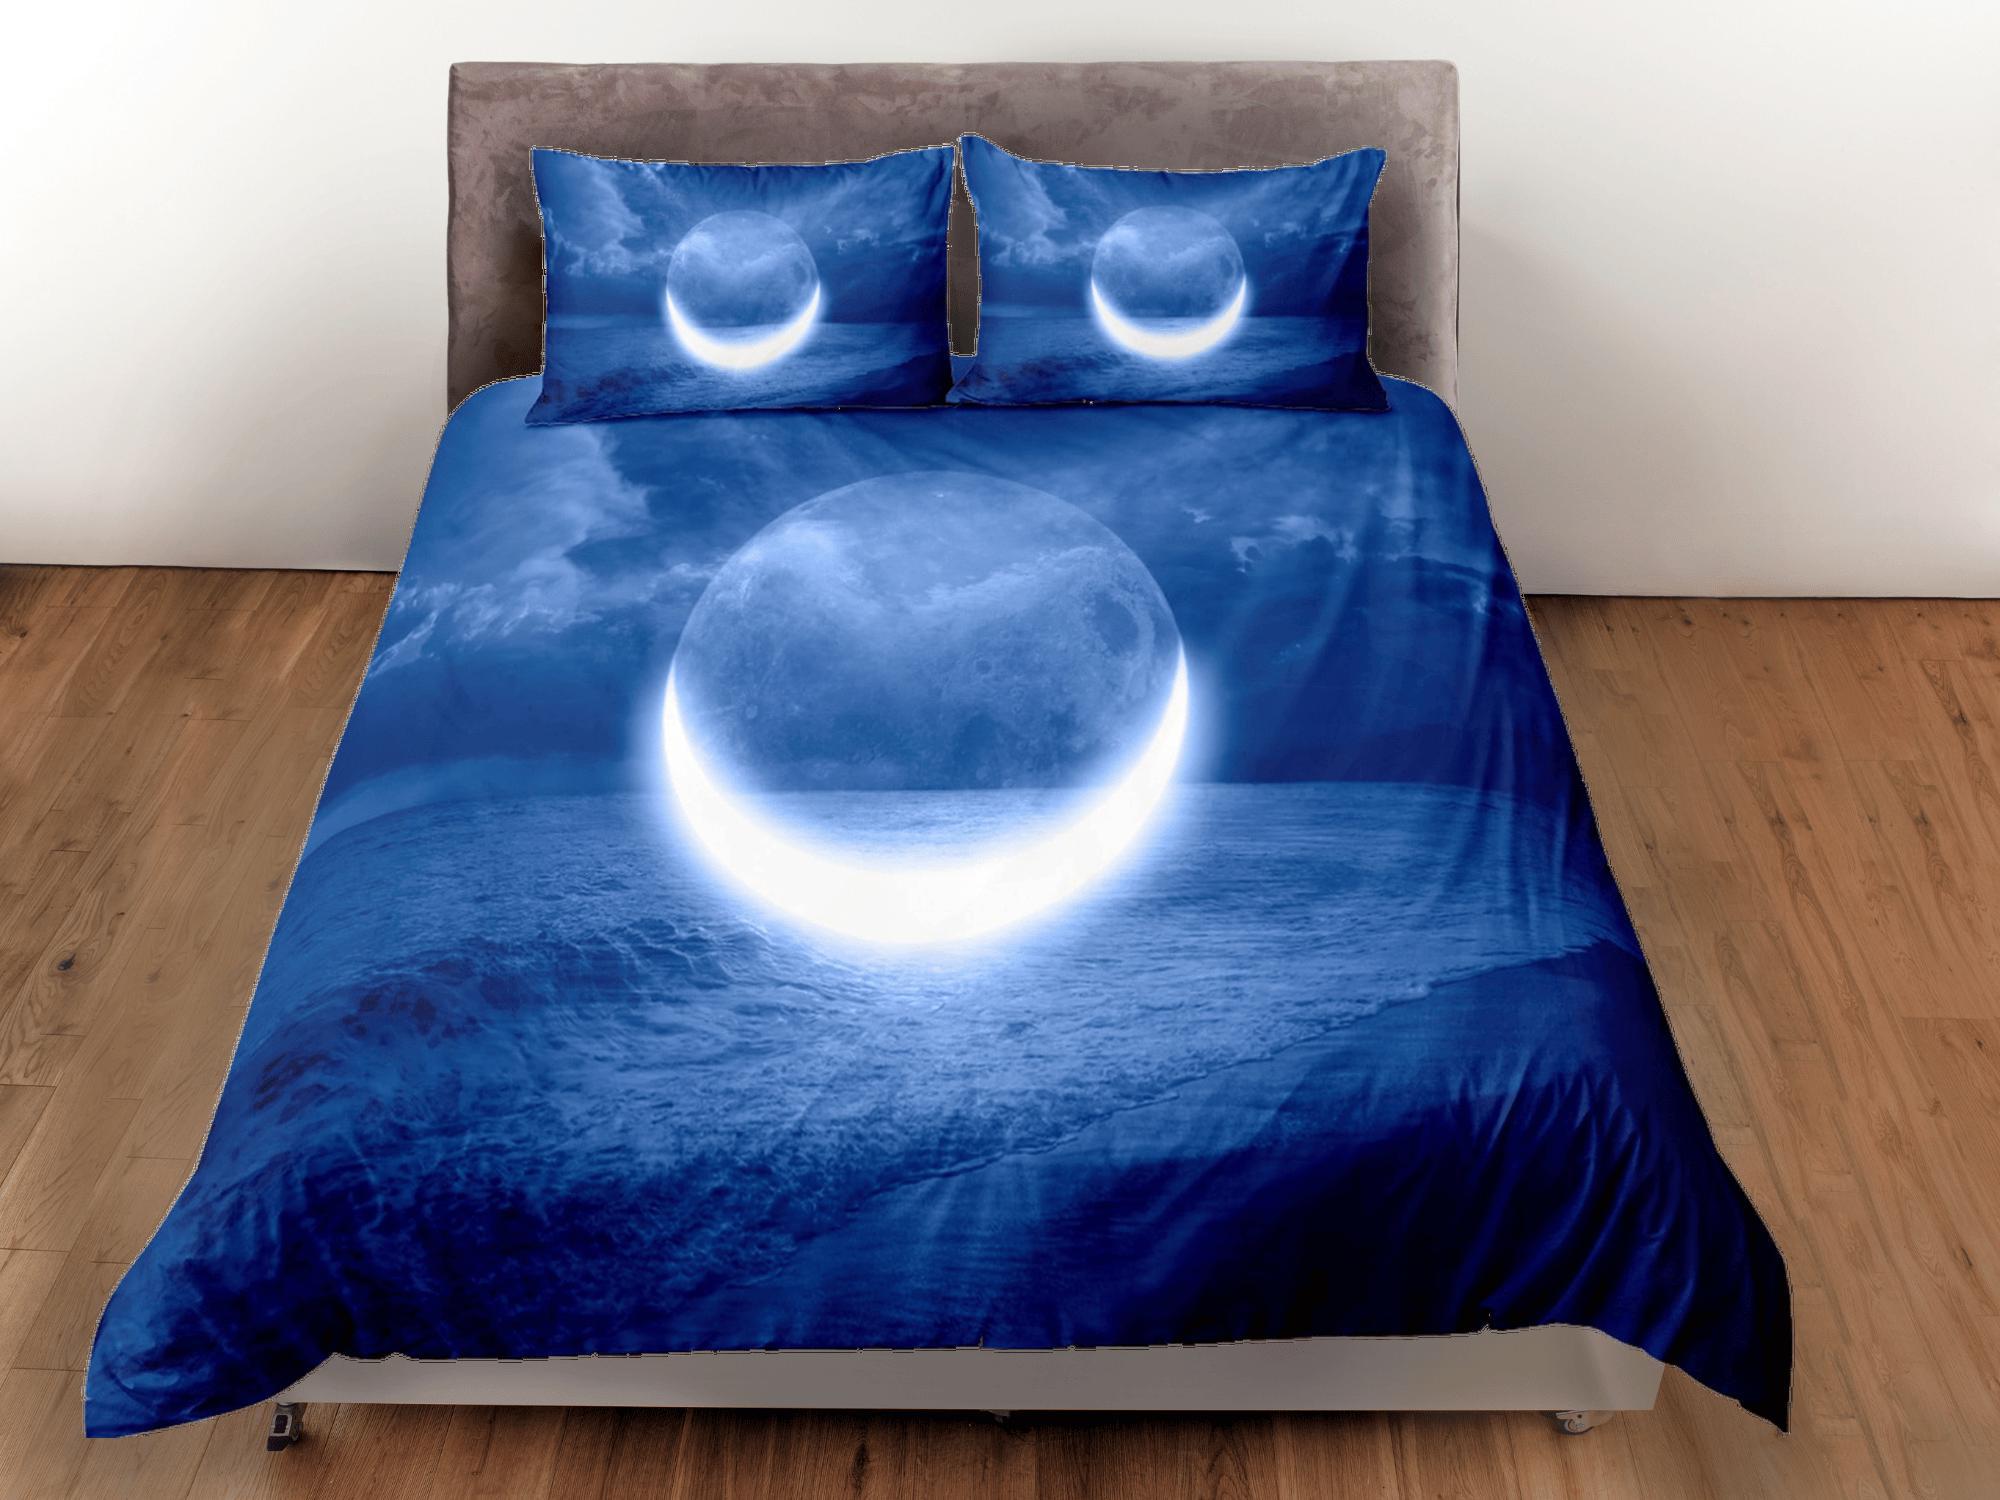 daintyduvet Crescent Moon Night Duvet Cover Set Colorful Bedspread, Dorm Bedding with Pillowcase